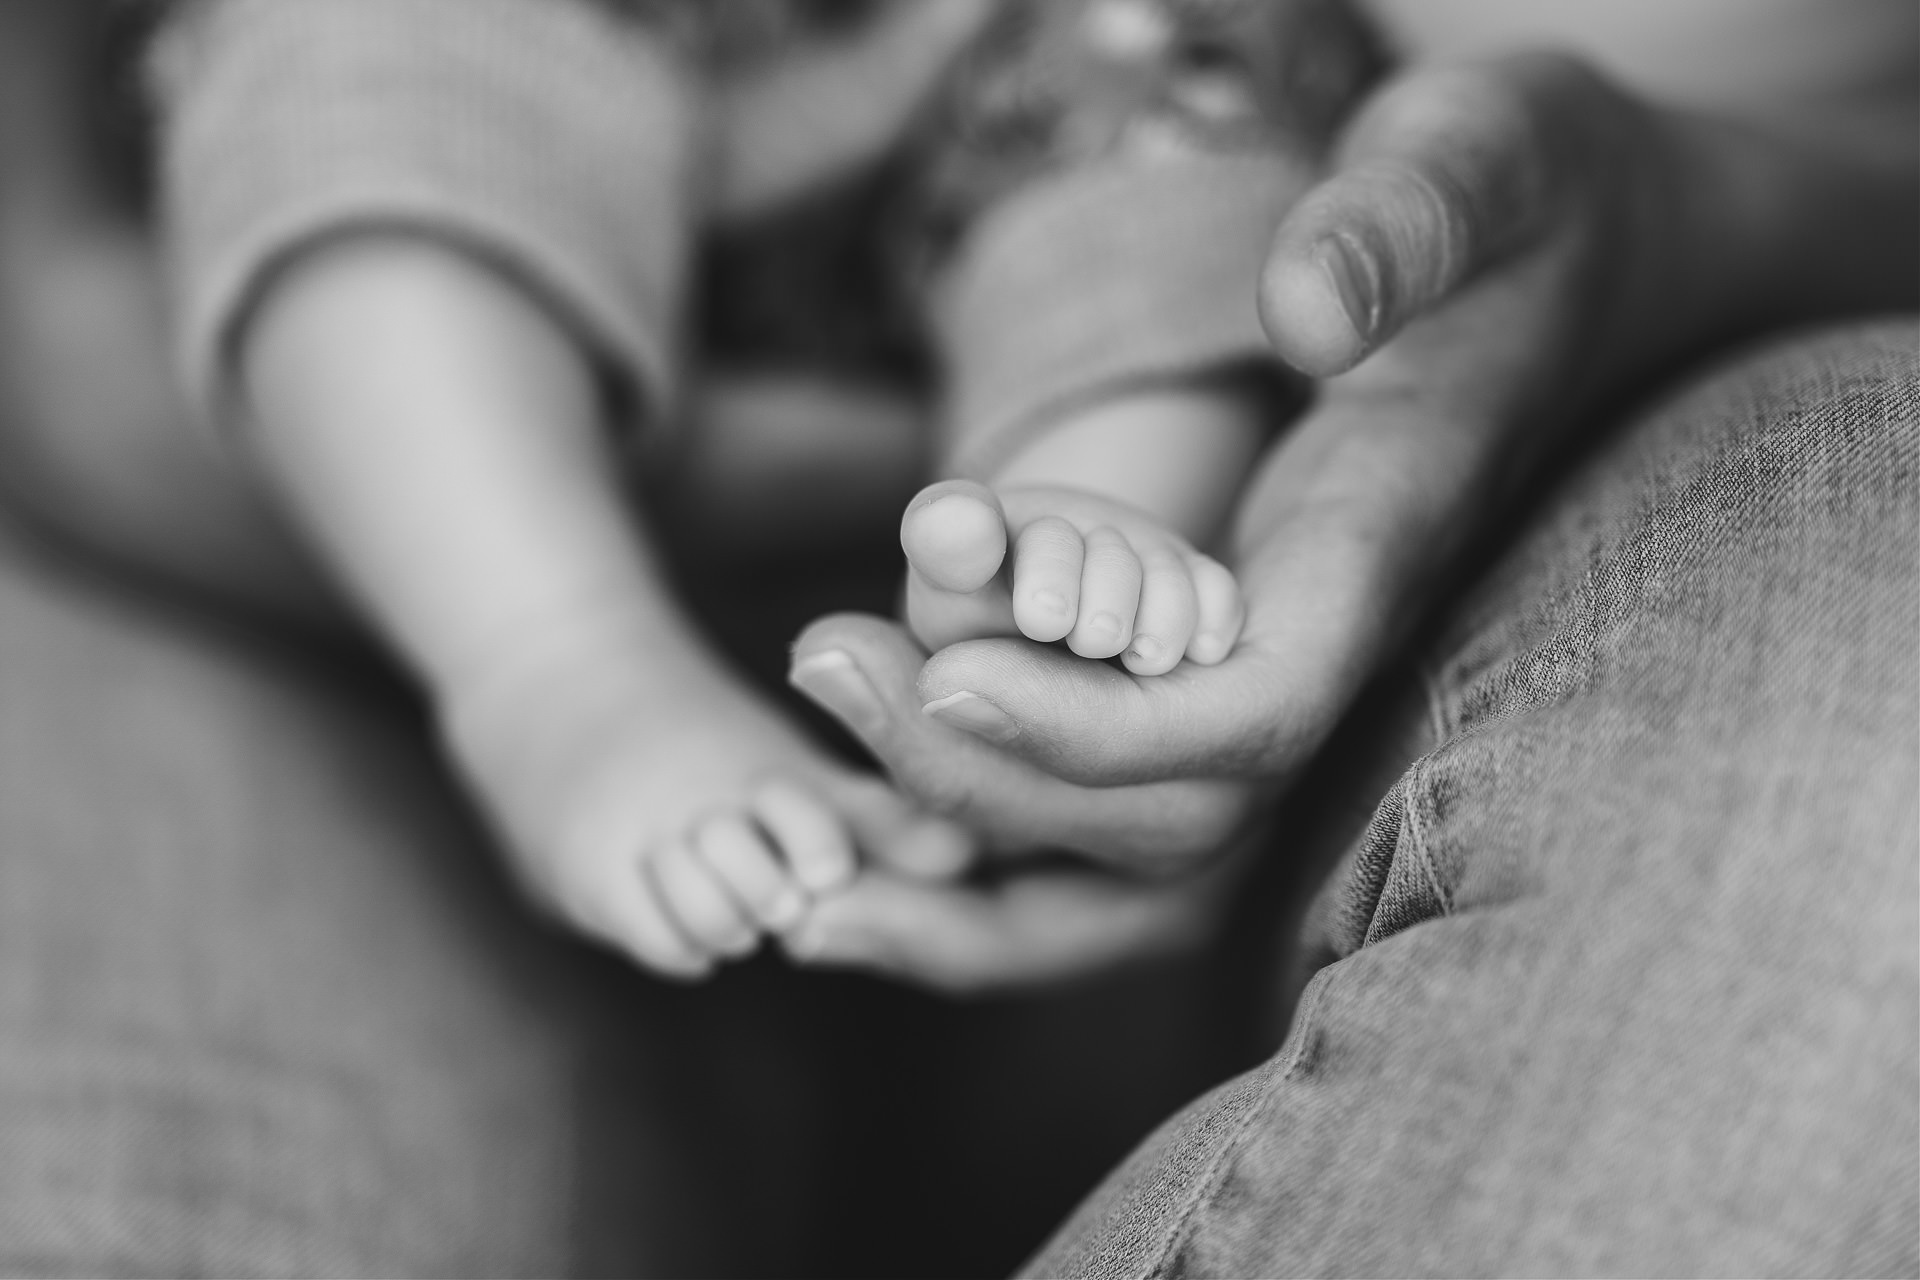 Devon baby photography image of a woman's hand holding tiny baby feet